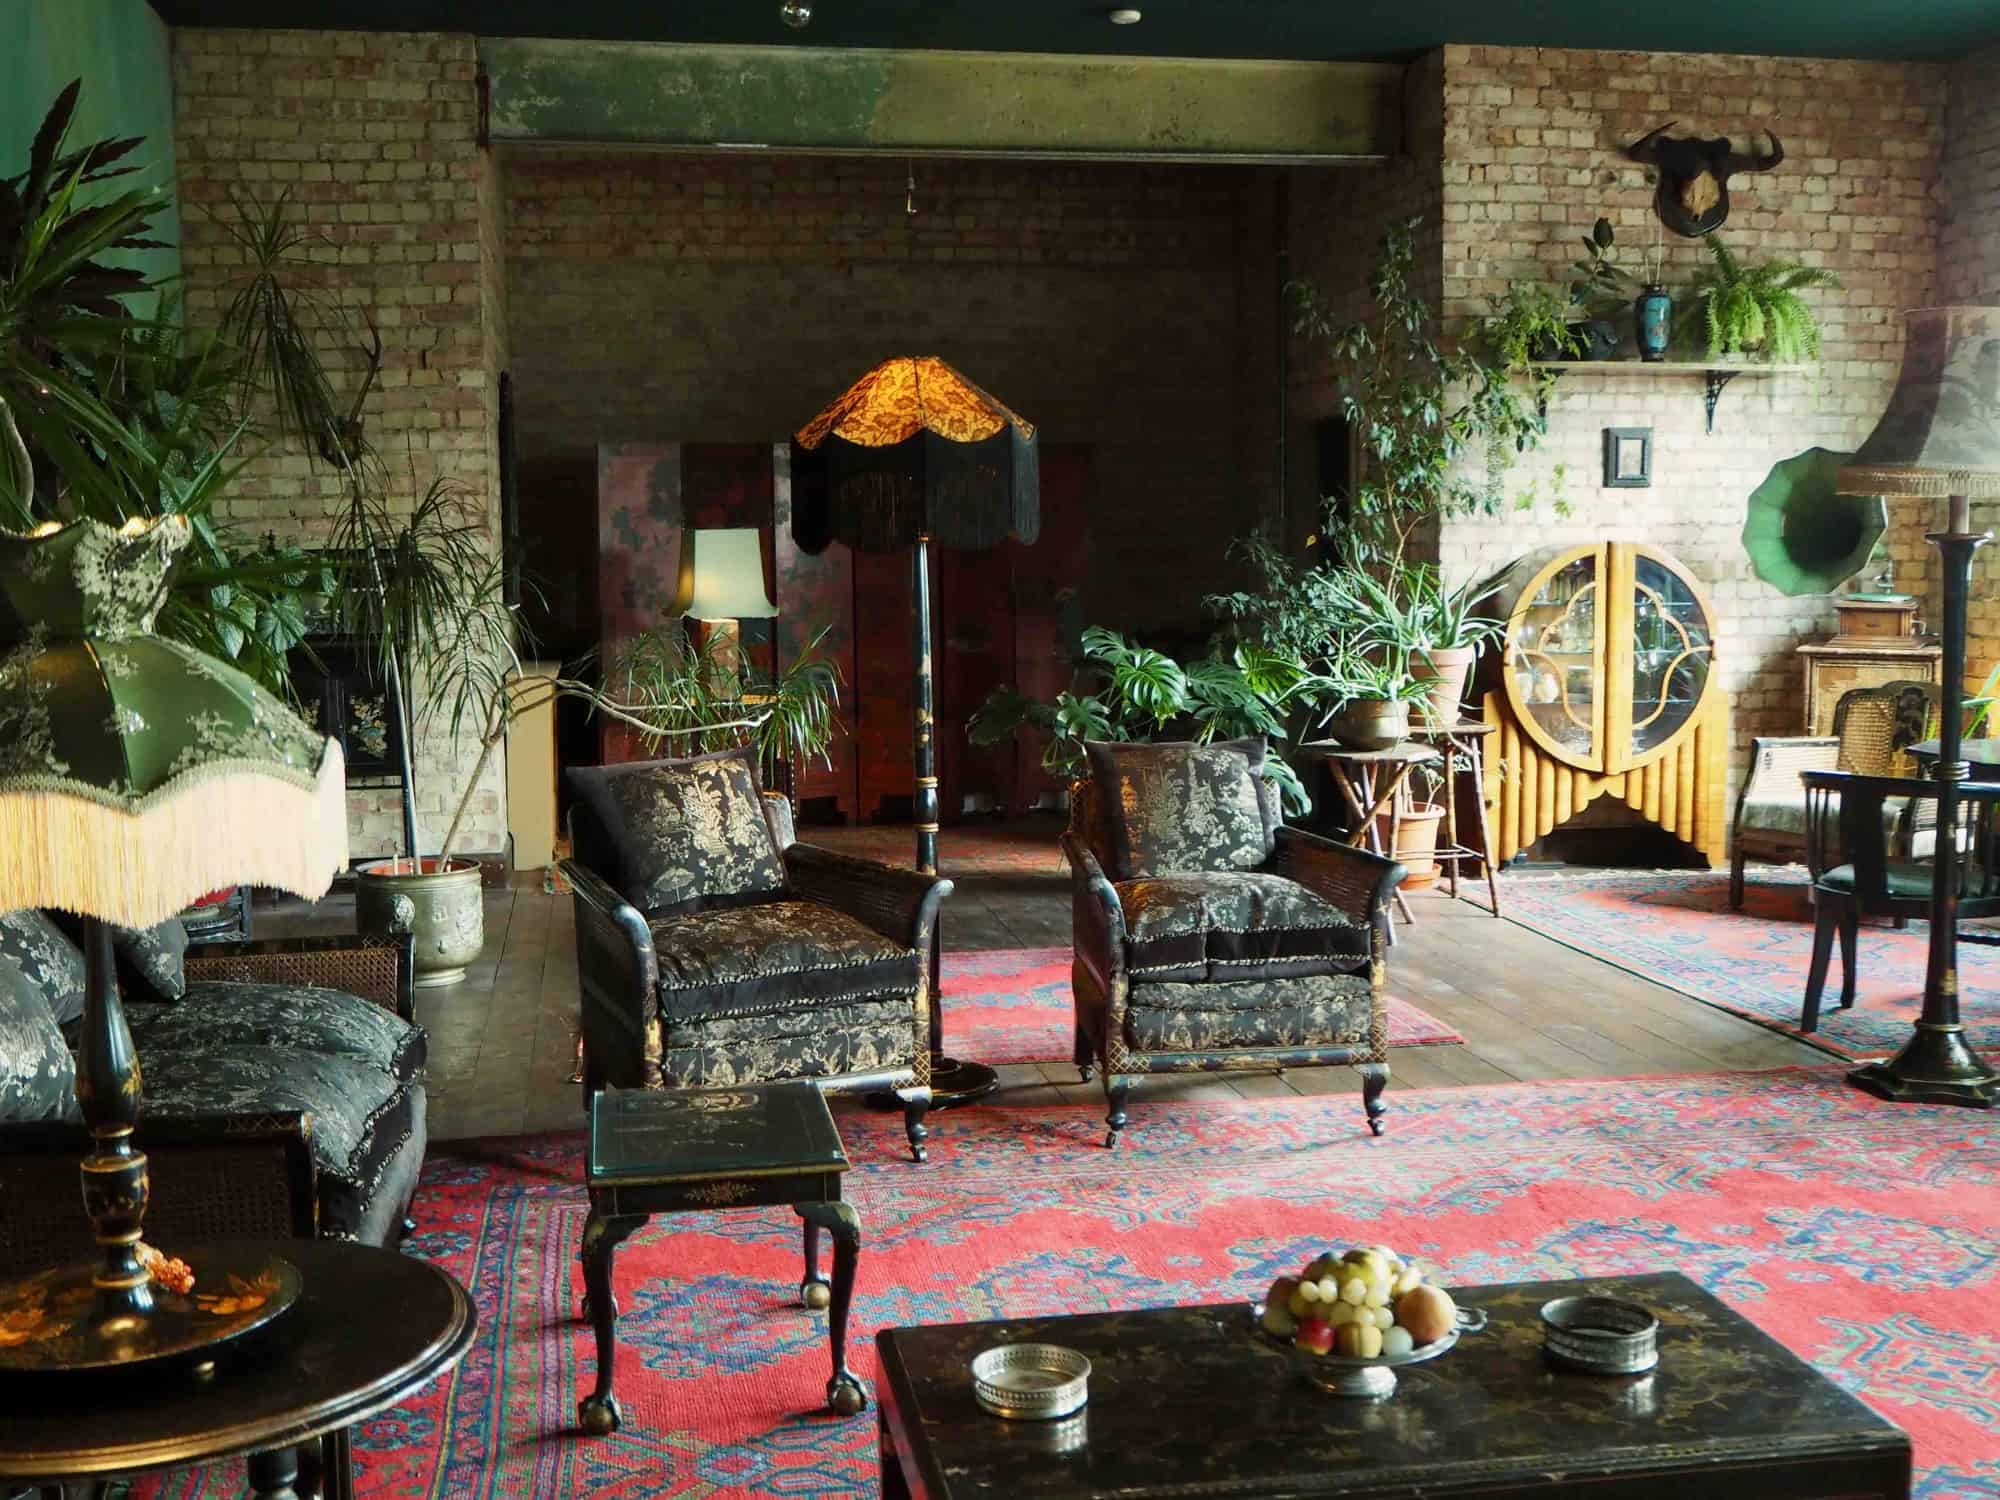 Monty E8 - A Victorian warehouse has been transformed into an art deco parlour, filled with antique objects and furnishings - The Location Guys